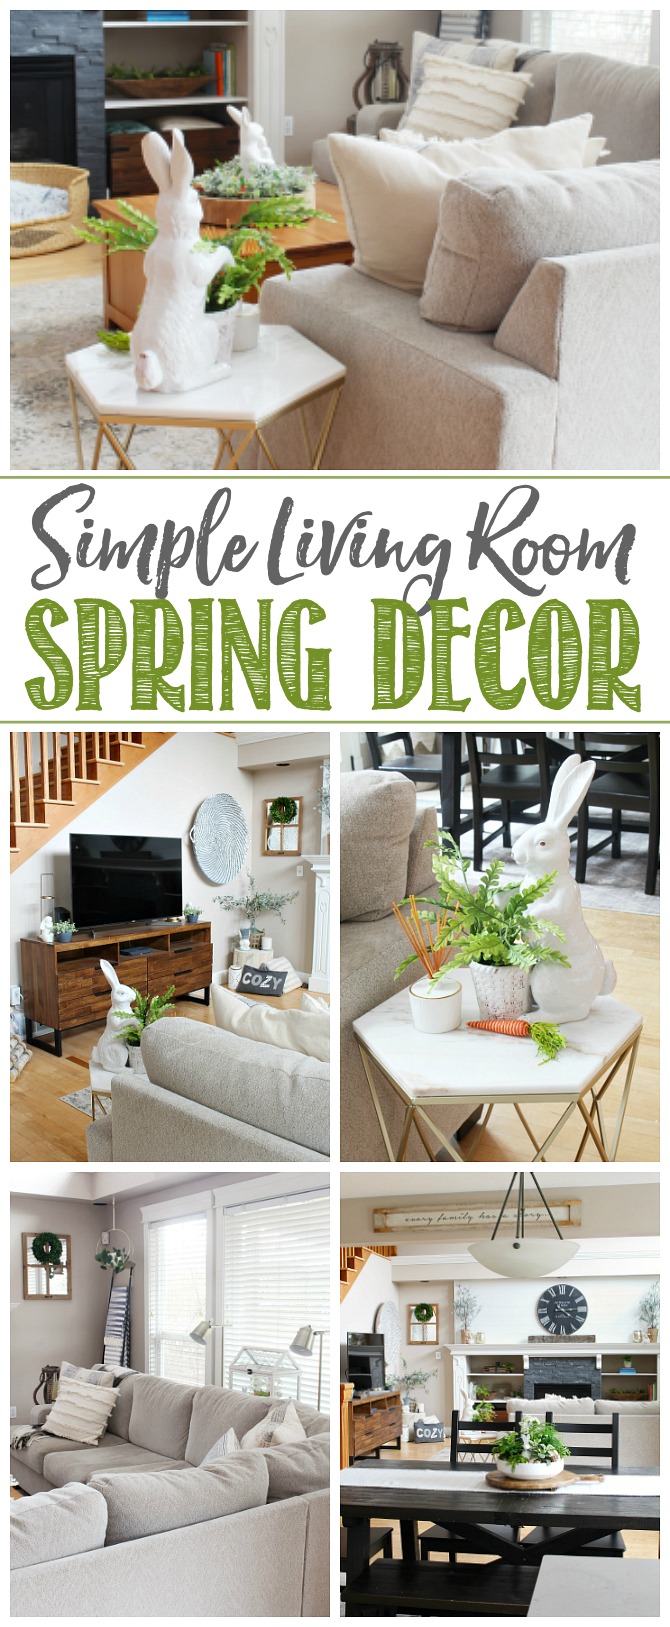 Simple Living Room Spring Decor. Collage of easy spring decor ideas for a transitional style living room.